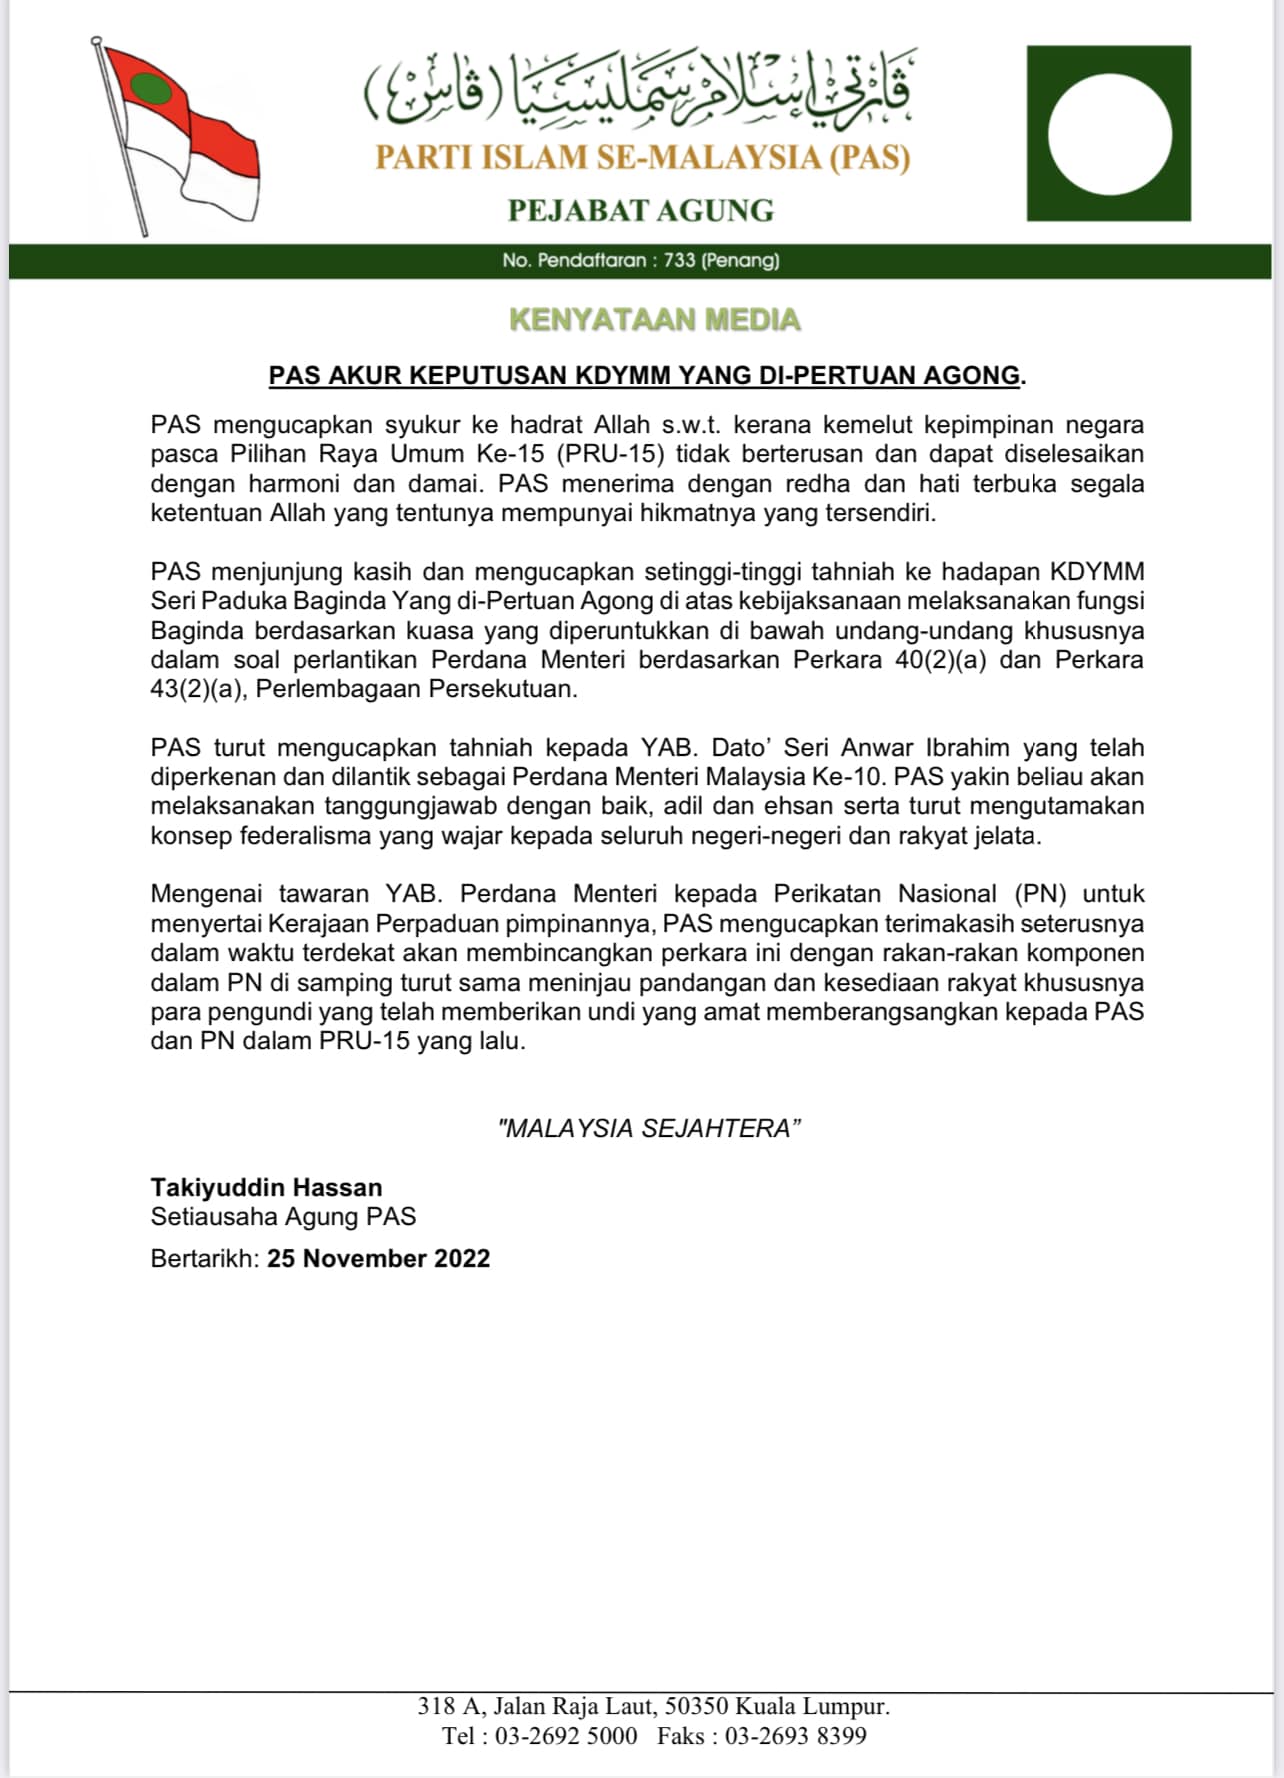 A statement issued by PAS secretary-general Takiyuddin Hassan on the potential of PN joining the unity government. Image credit: Takiyuddin Haji Hassan